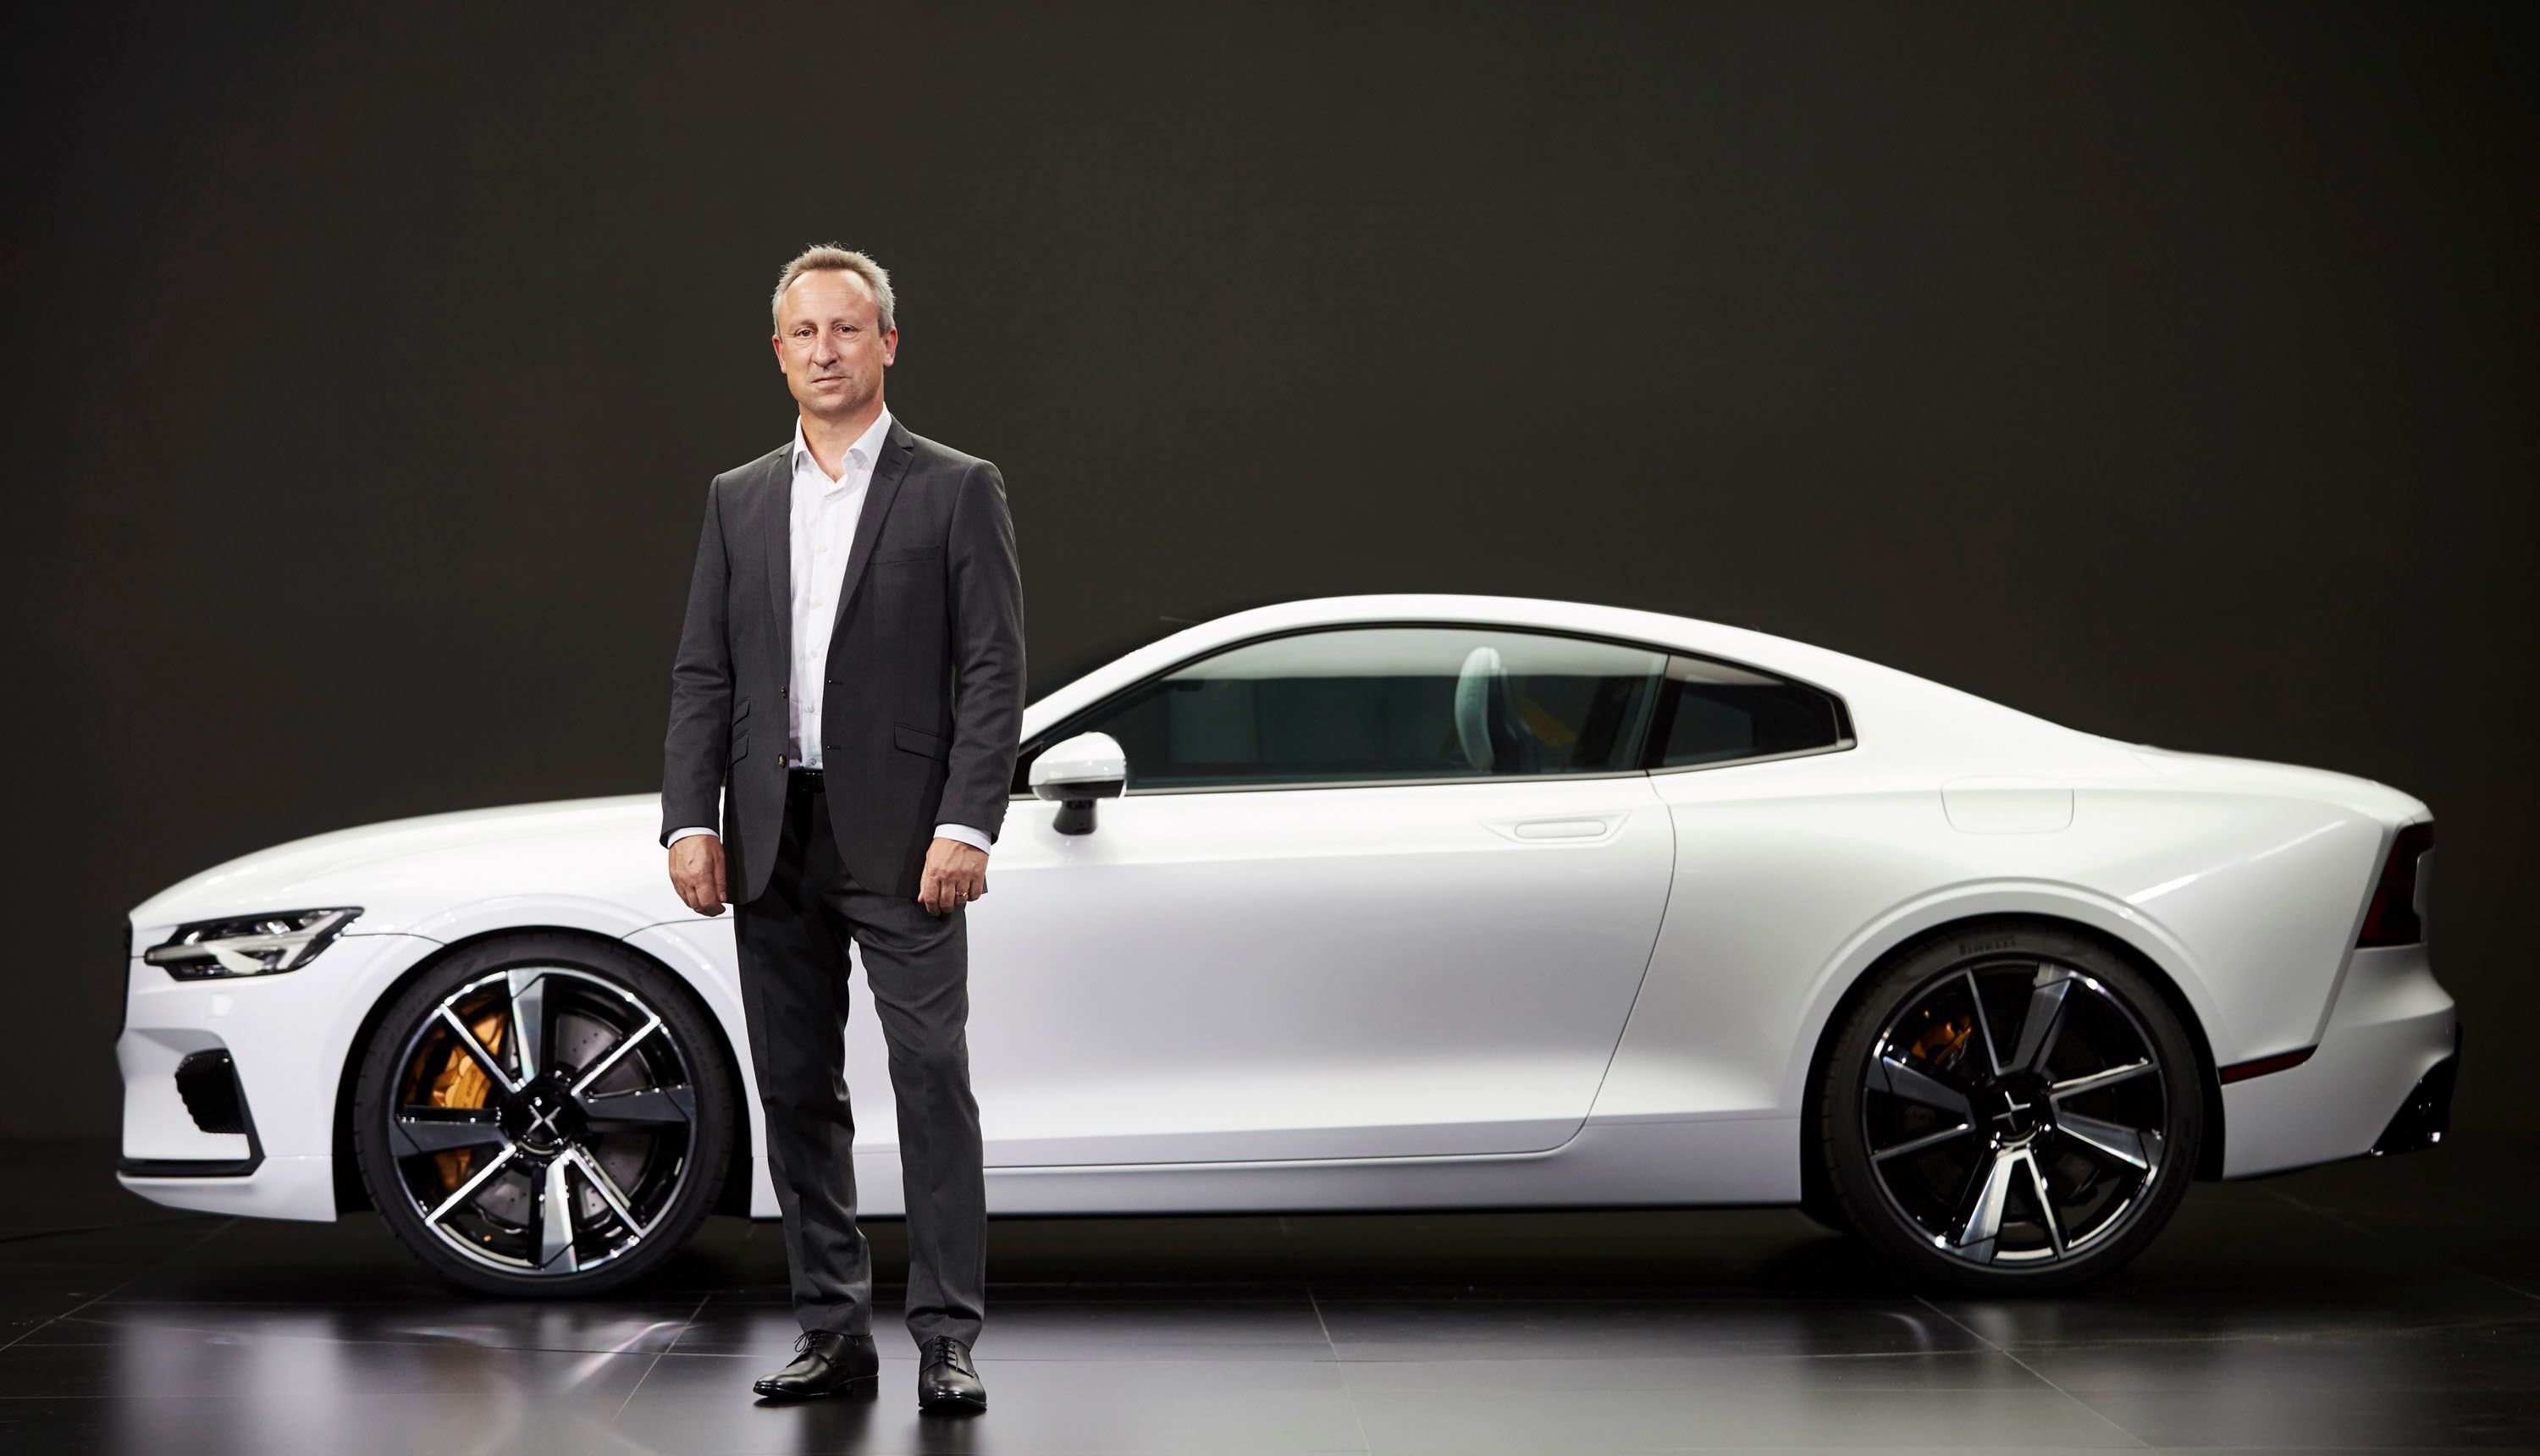 2018 Customer Demand Could Force Polestar to Increase Production of Polestar 1